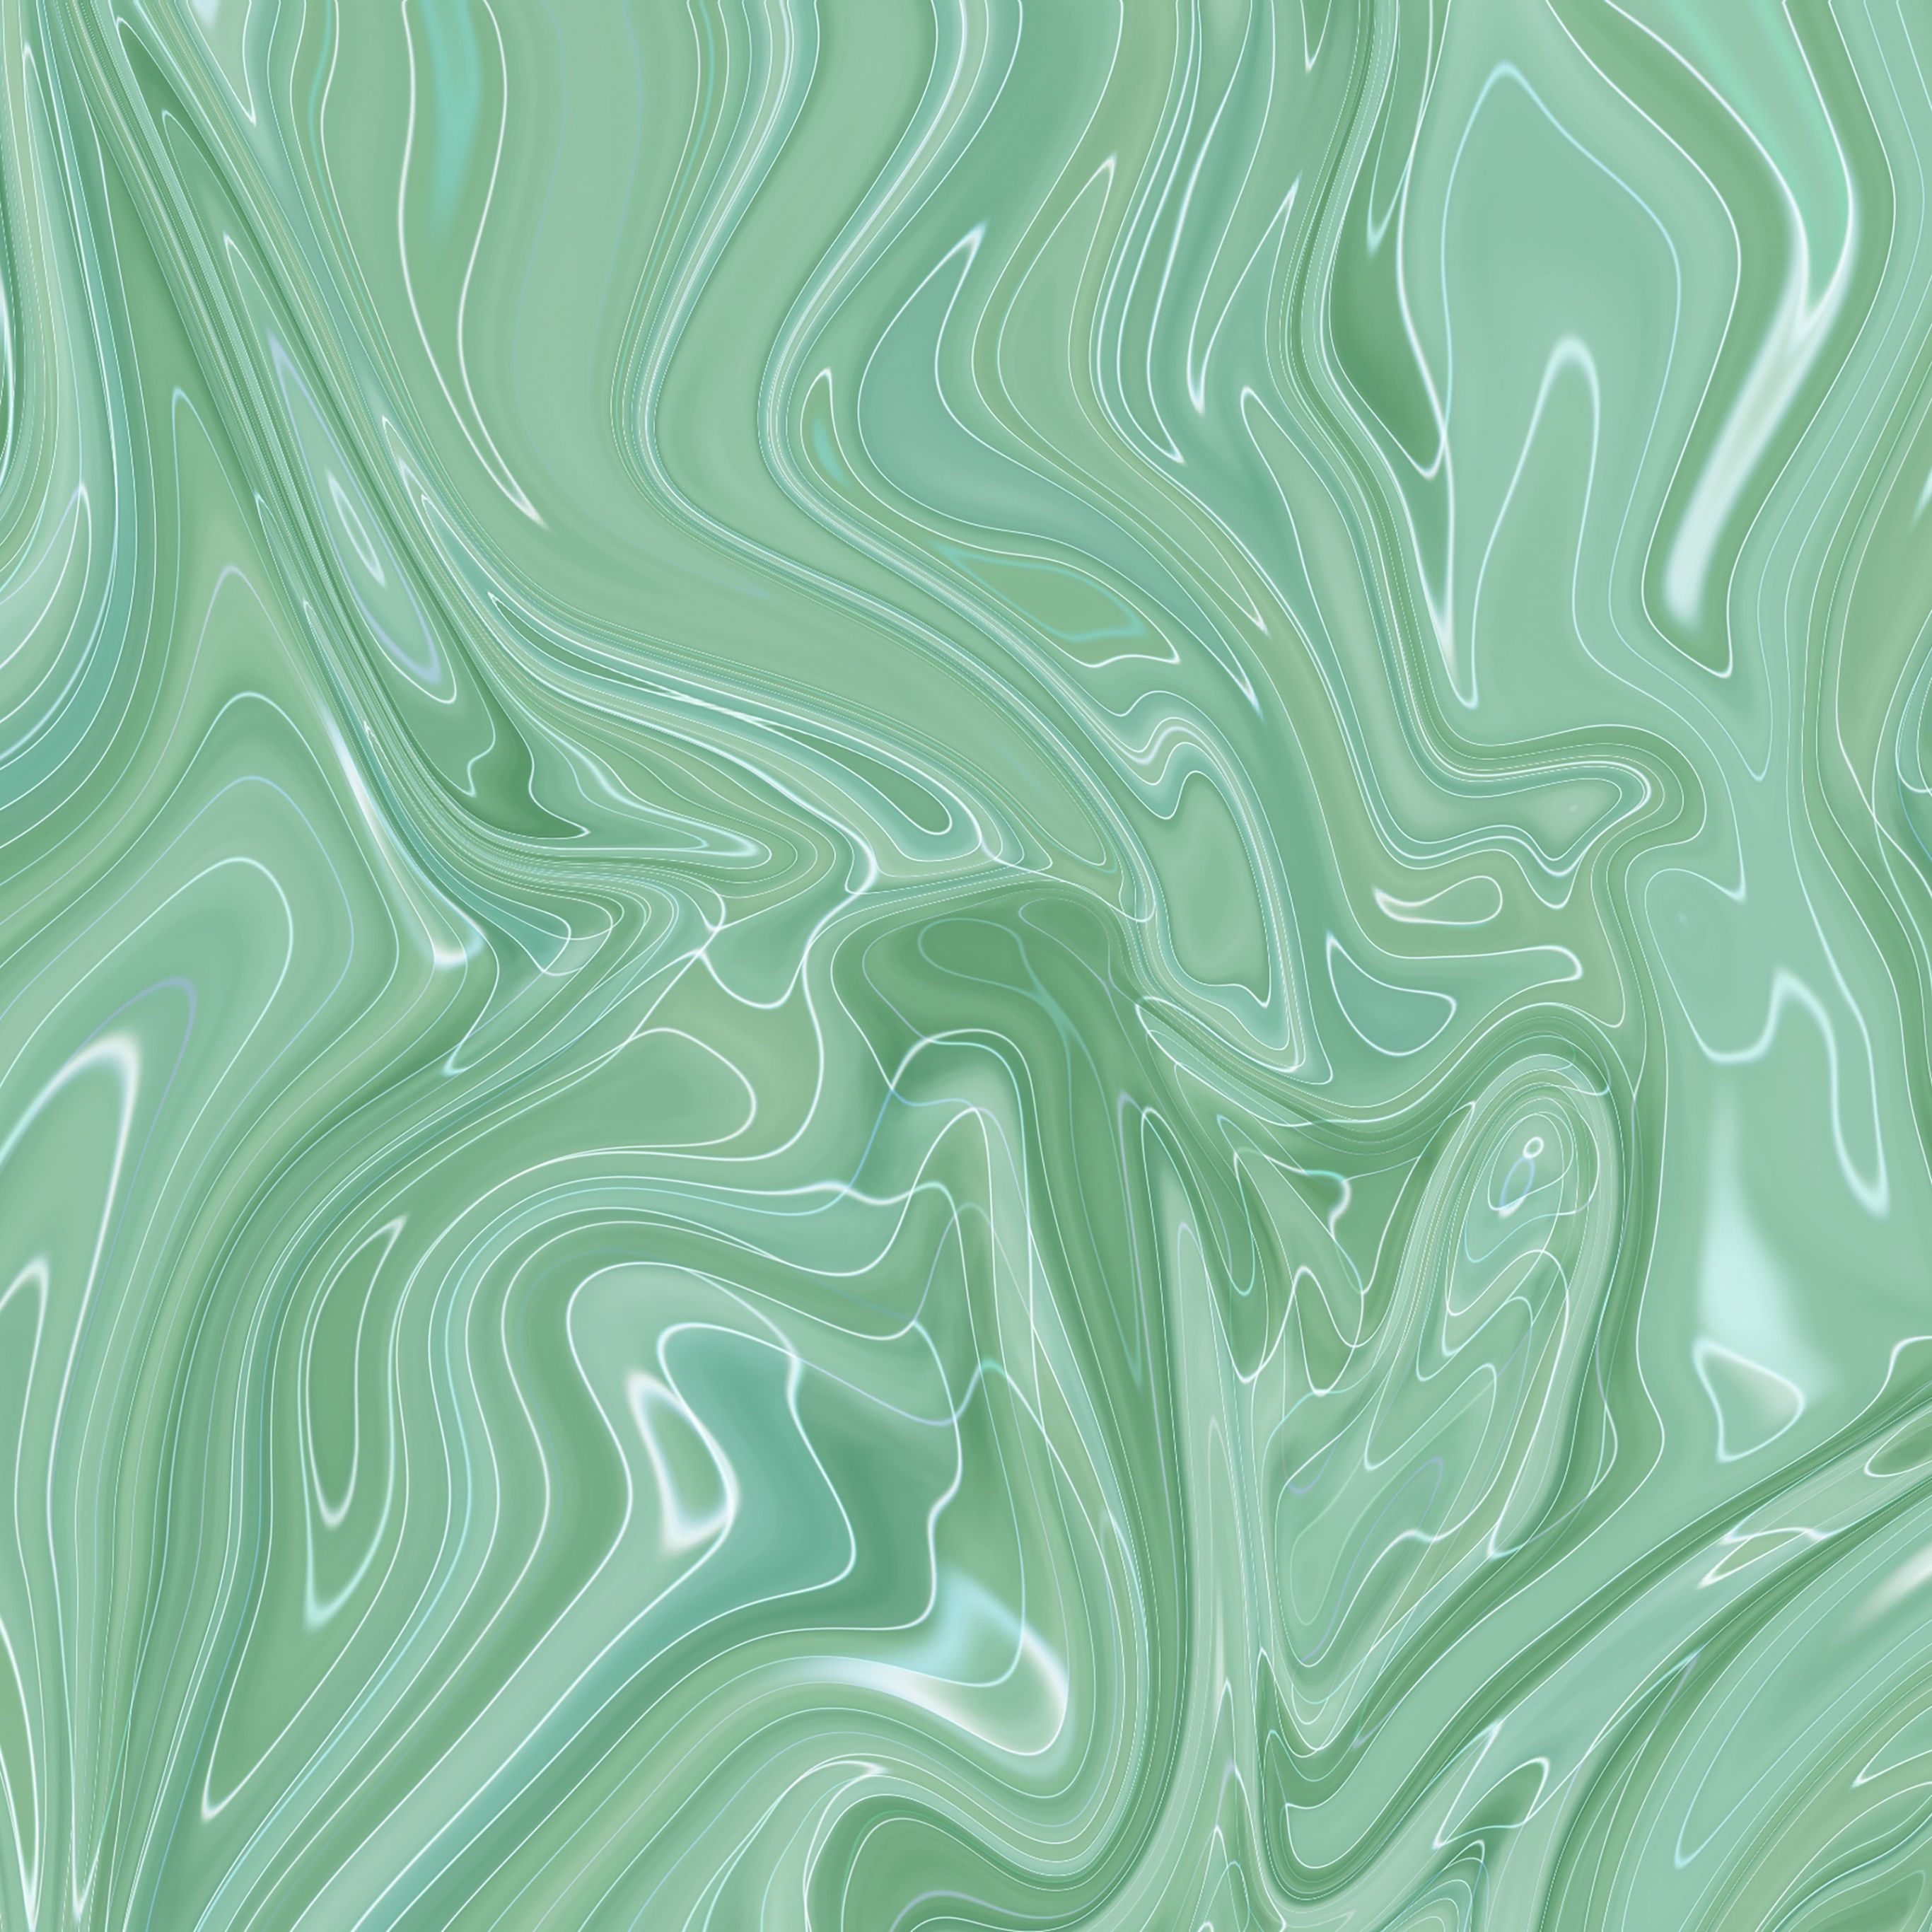 A green and white abstract painting. - Sage green